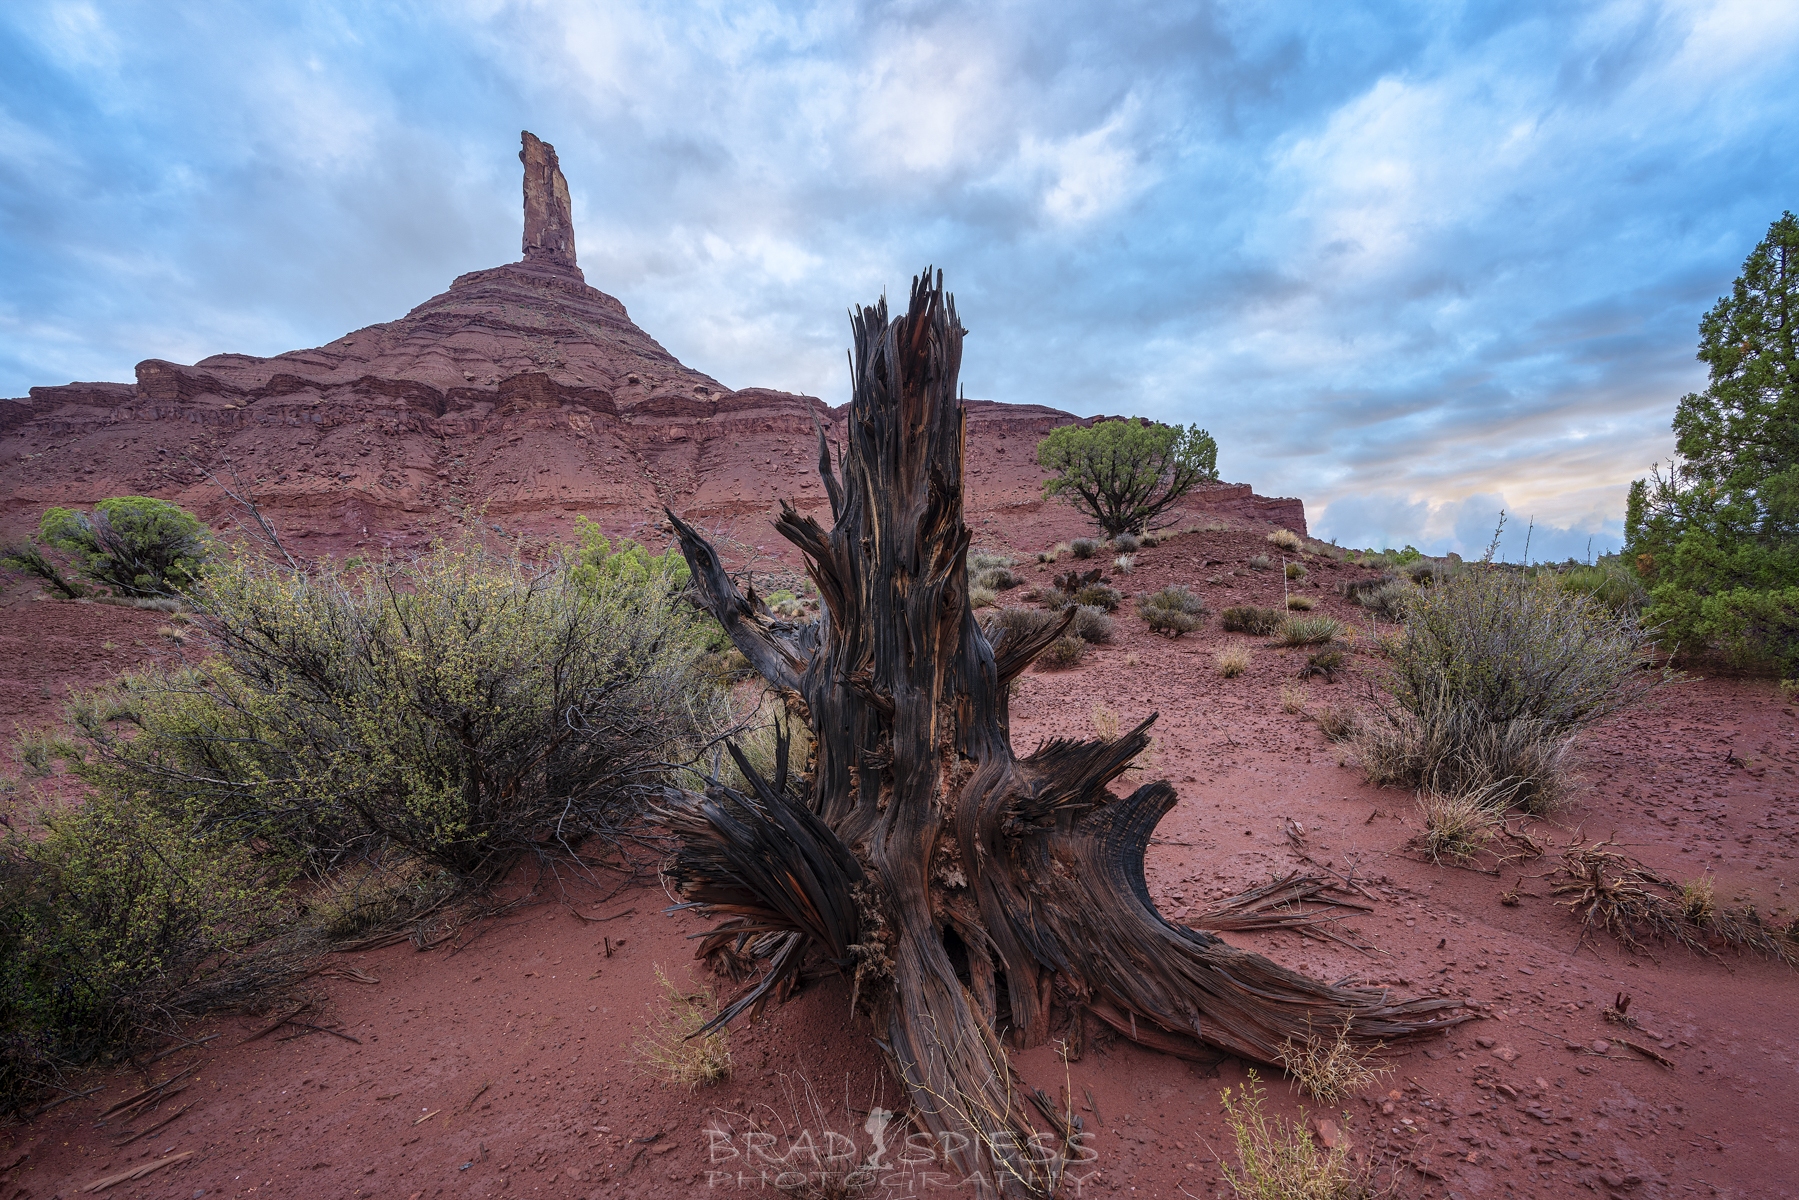 The morning light putting on a show with the clouds near Castleton Tower in Moab, Utah.